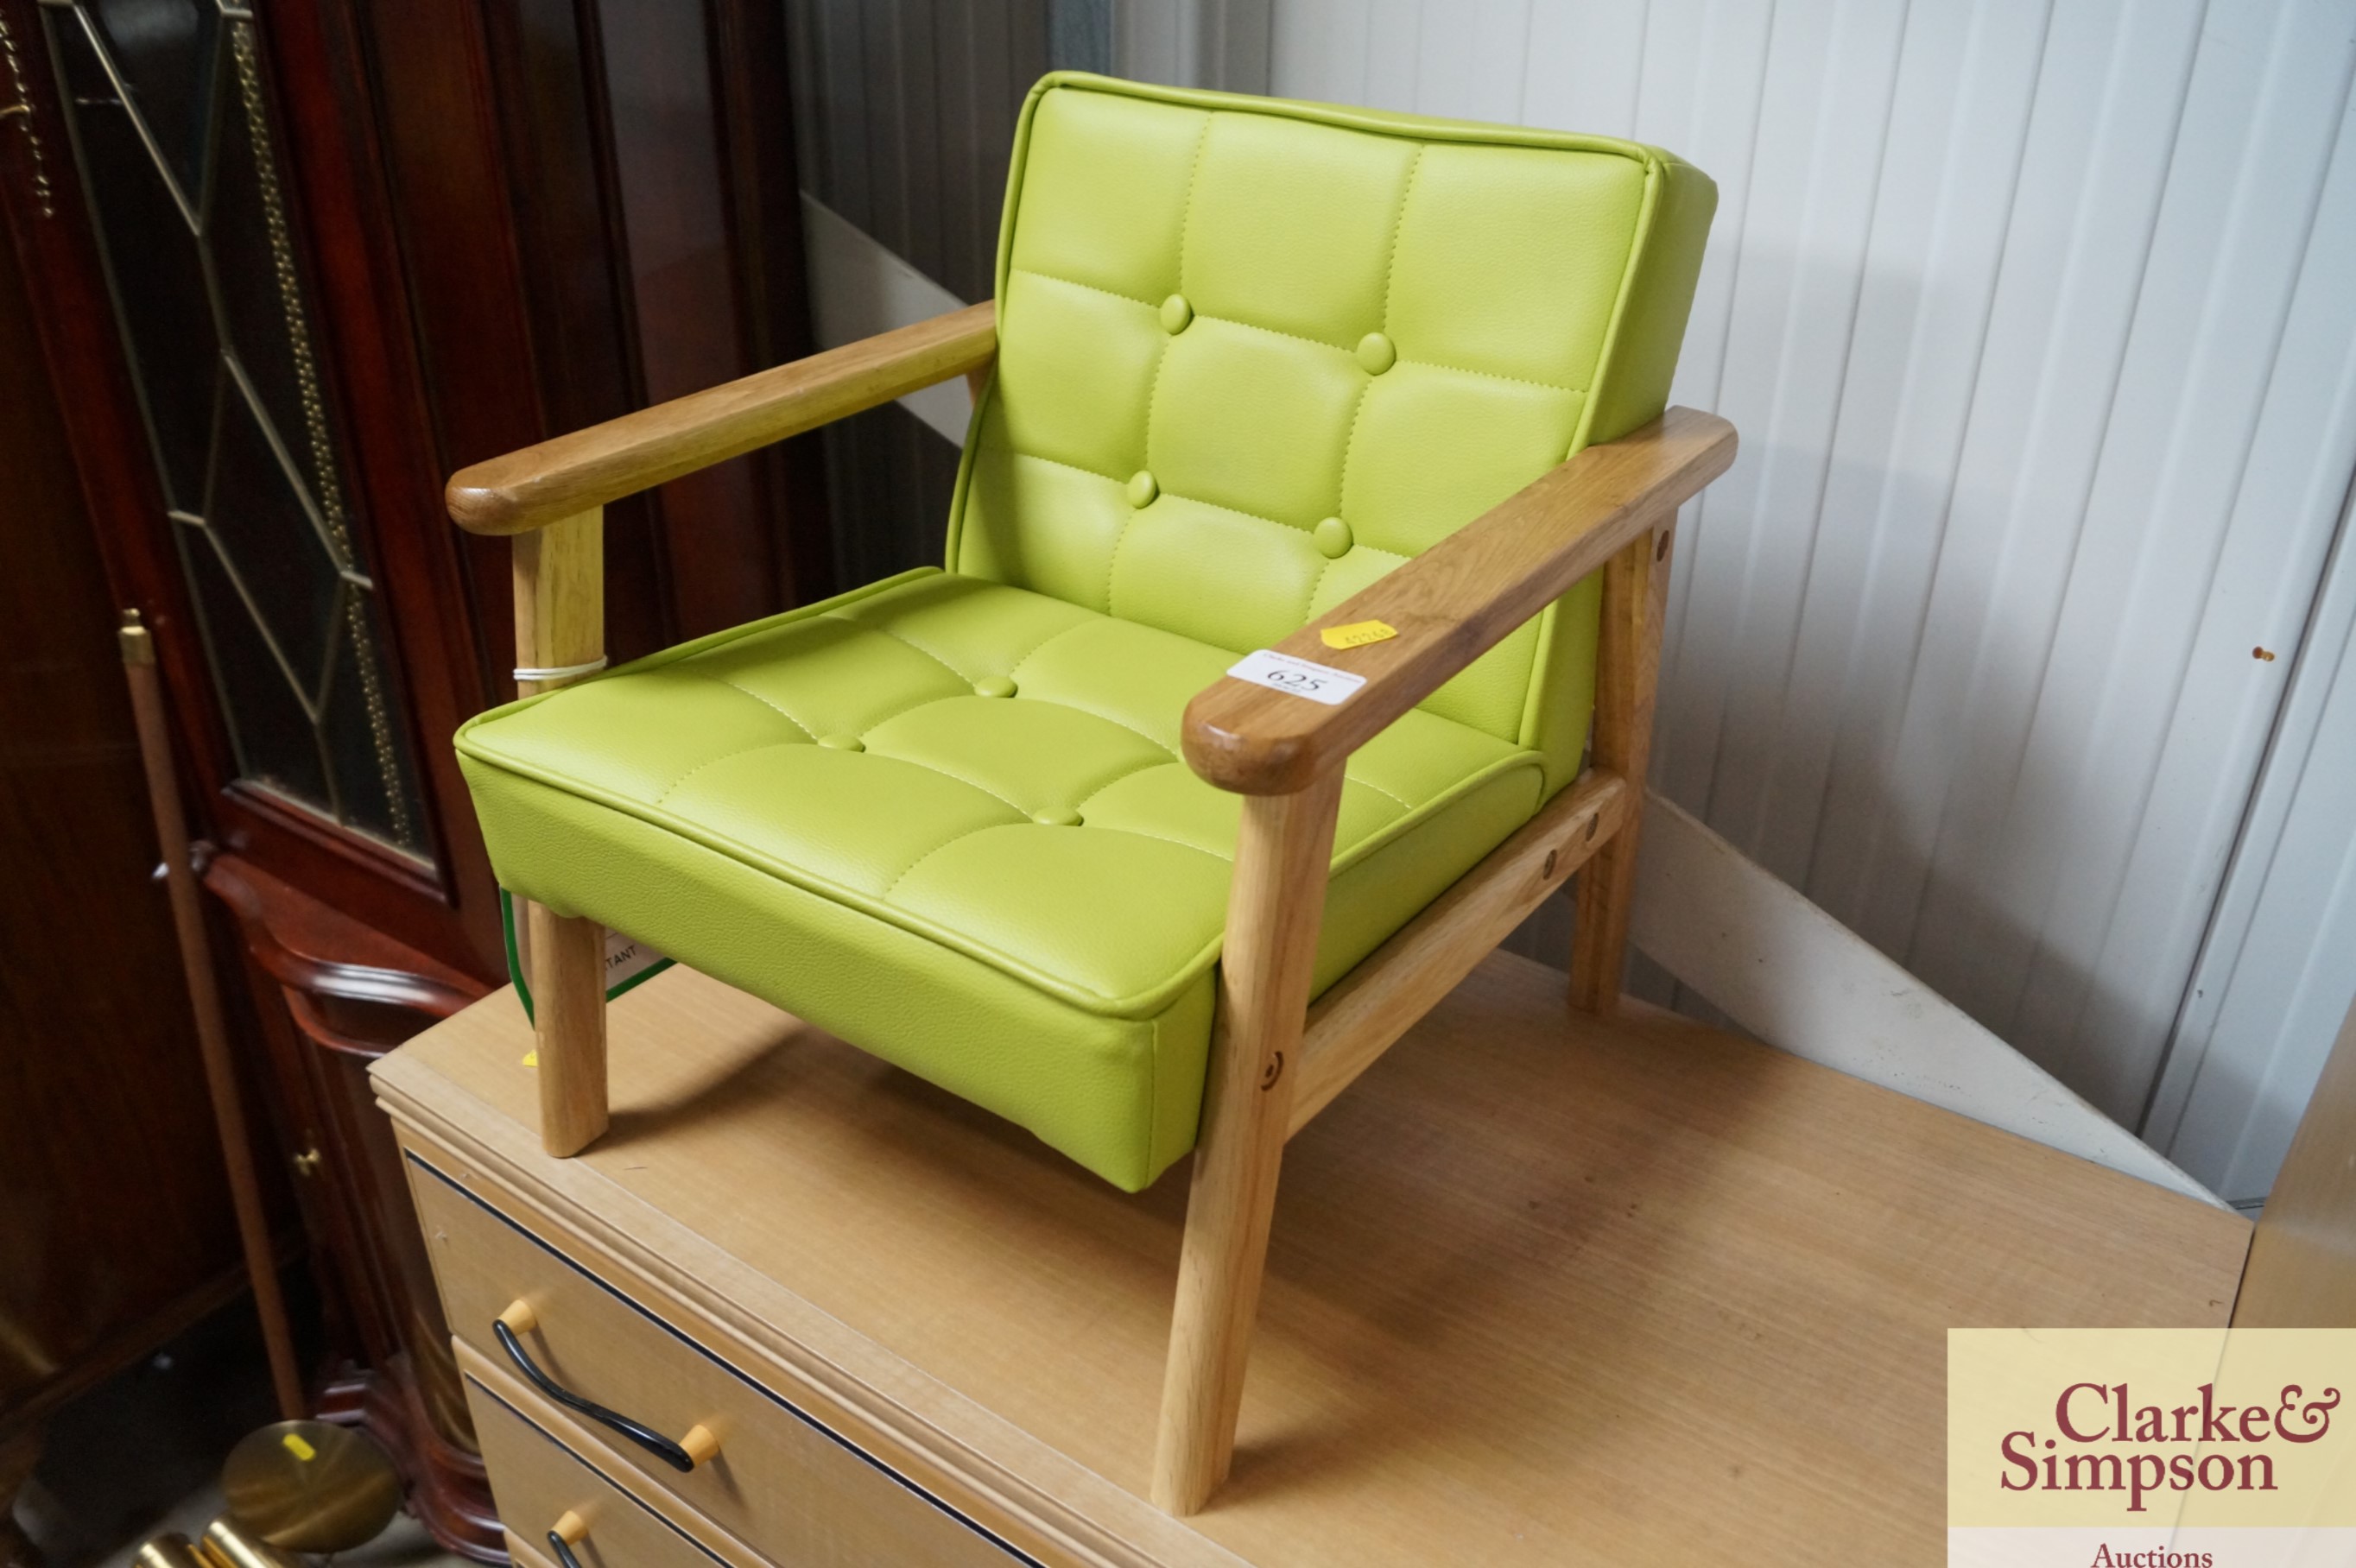 A child's chair